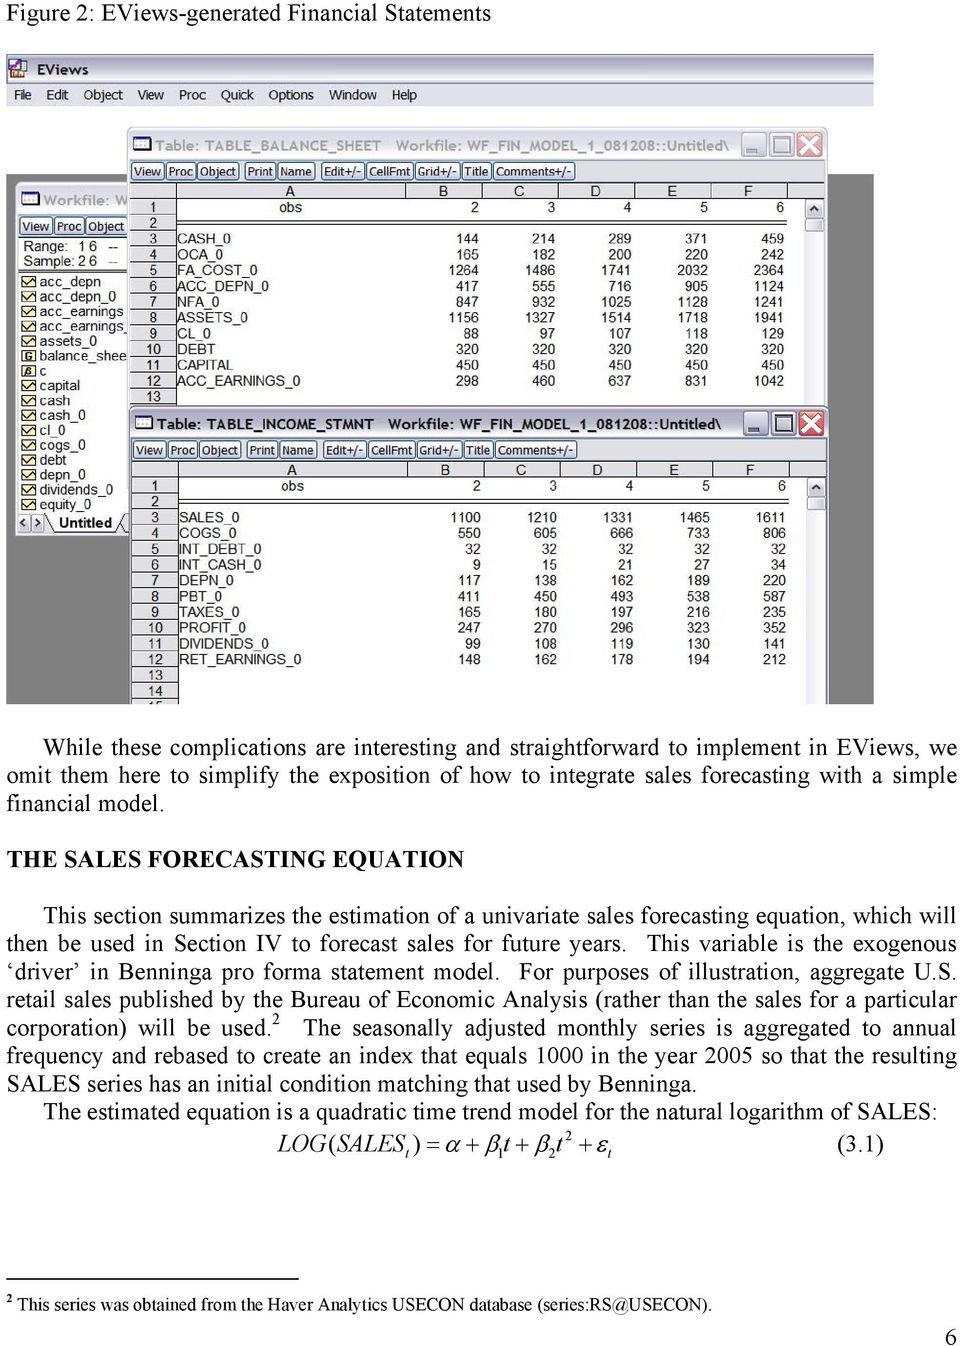 THE SALES FORECASTING EQUATION This section summarizes the estimation of a univariate sales forecasting equation, which will then be used in Section IV to forecast sales for future years.